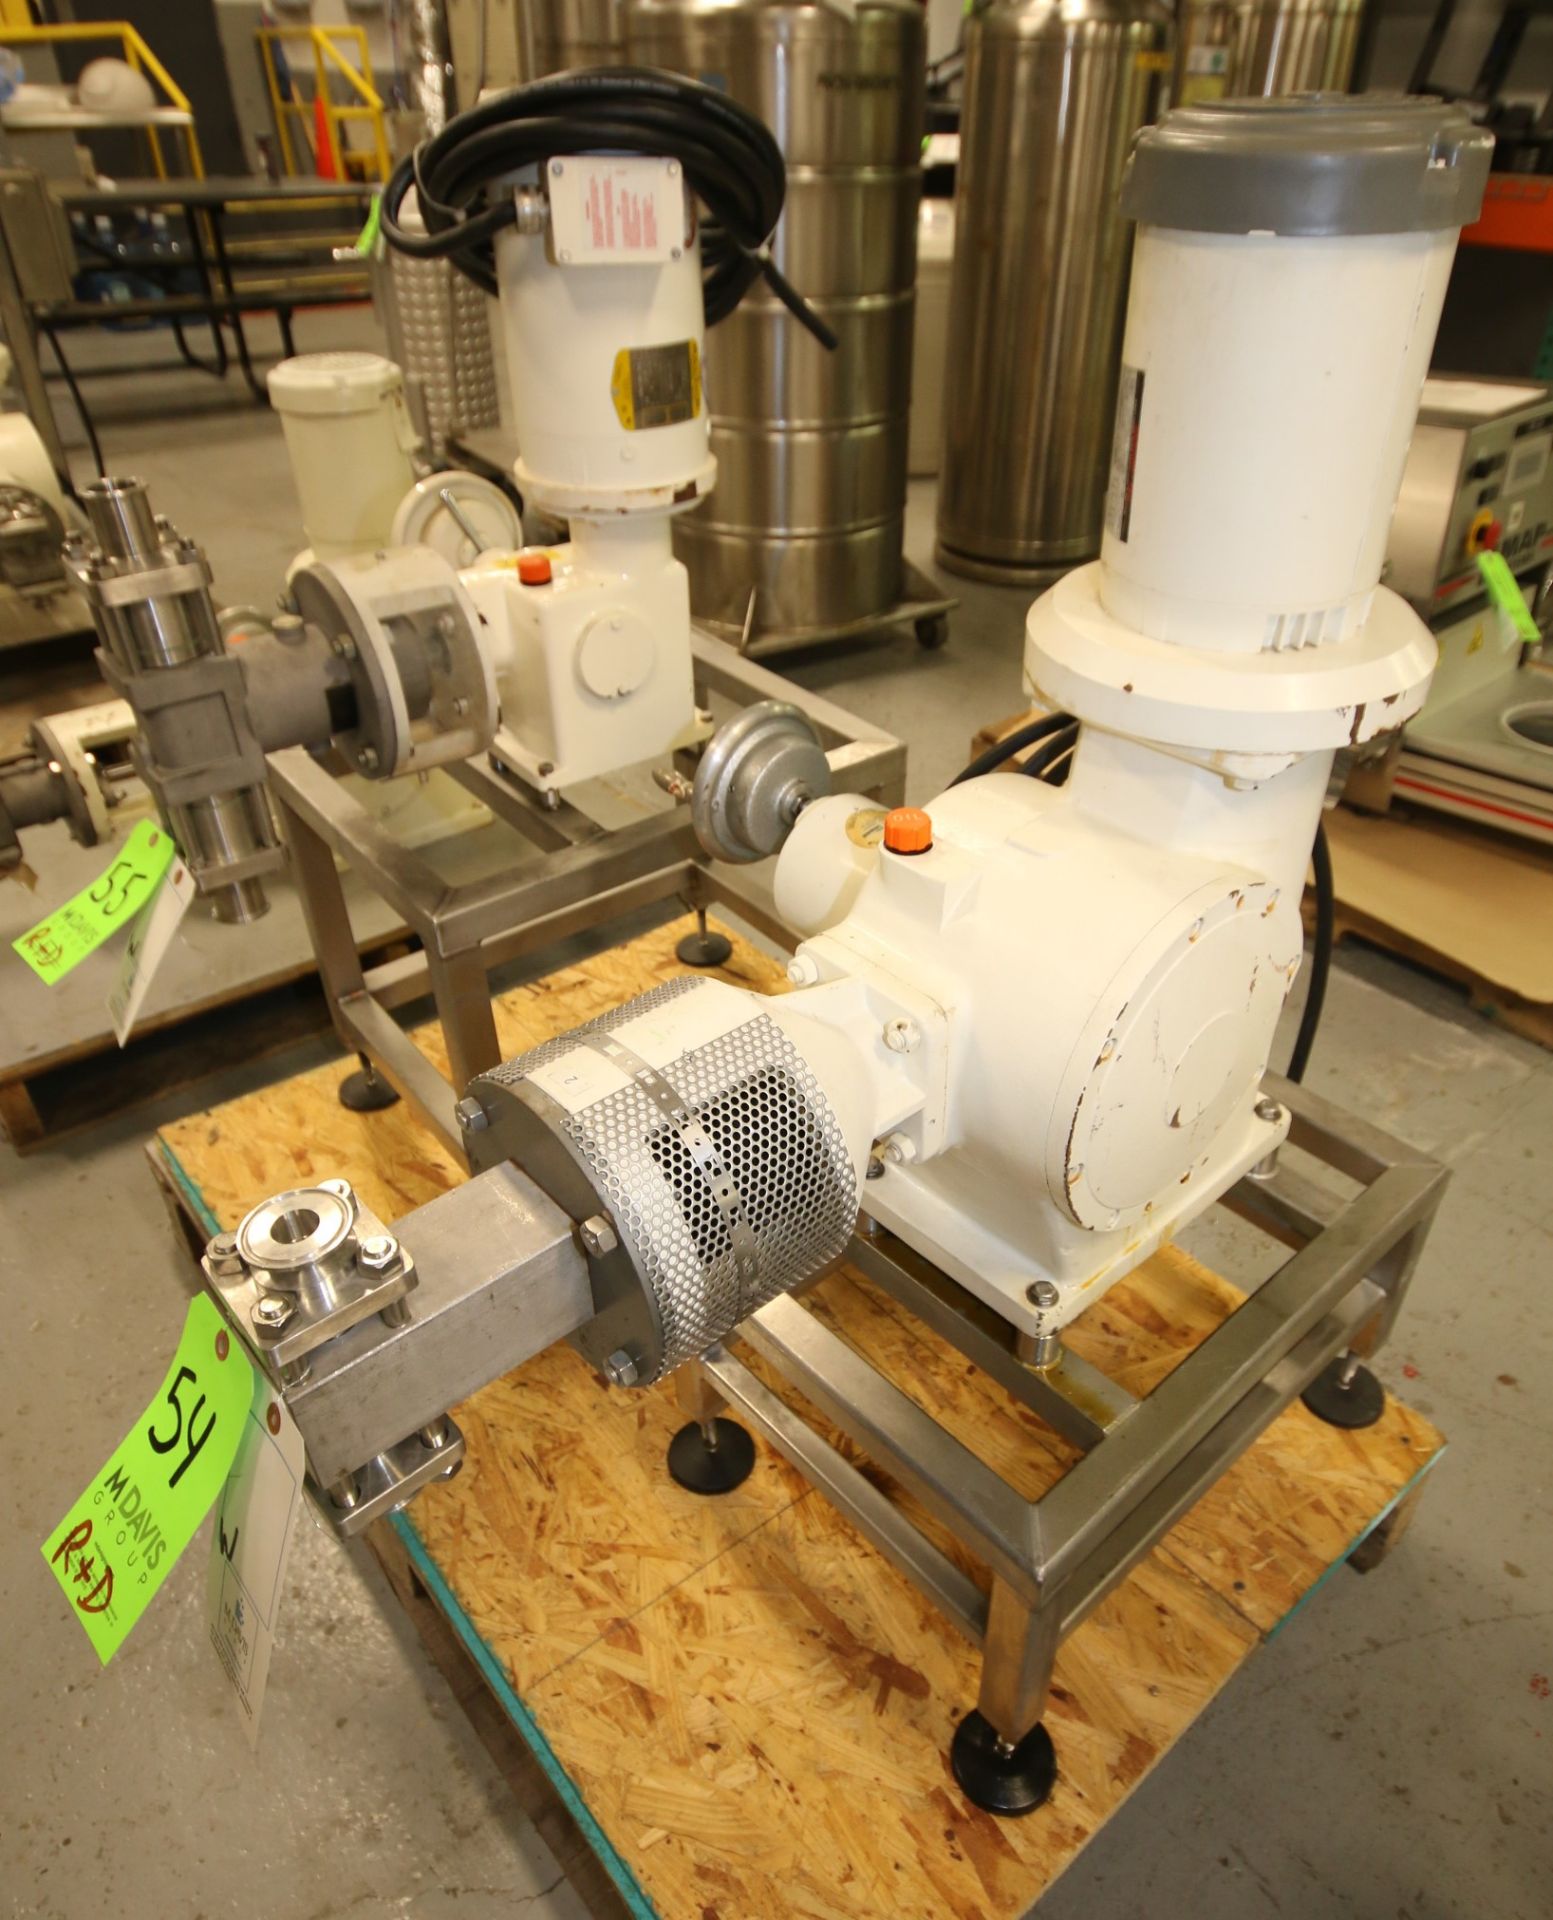 Bran - Lubbe Metering Pump, Type N-D431, SN A11420, with 1.5" Clamp Type Connections, US Motors 2 hp - Image 2 of 4